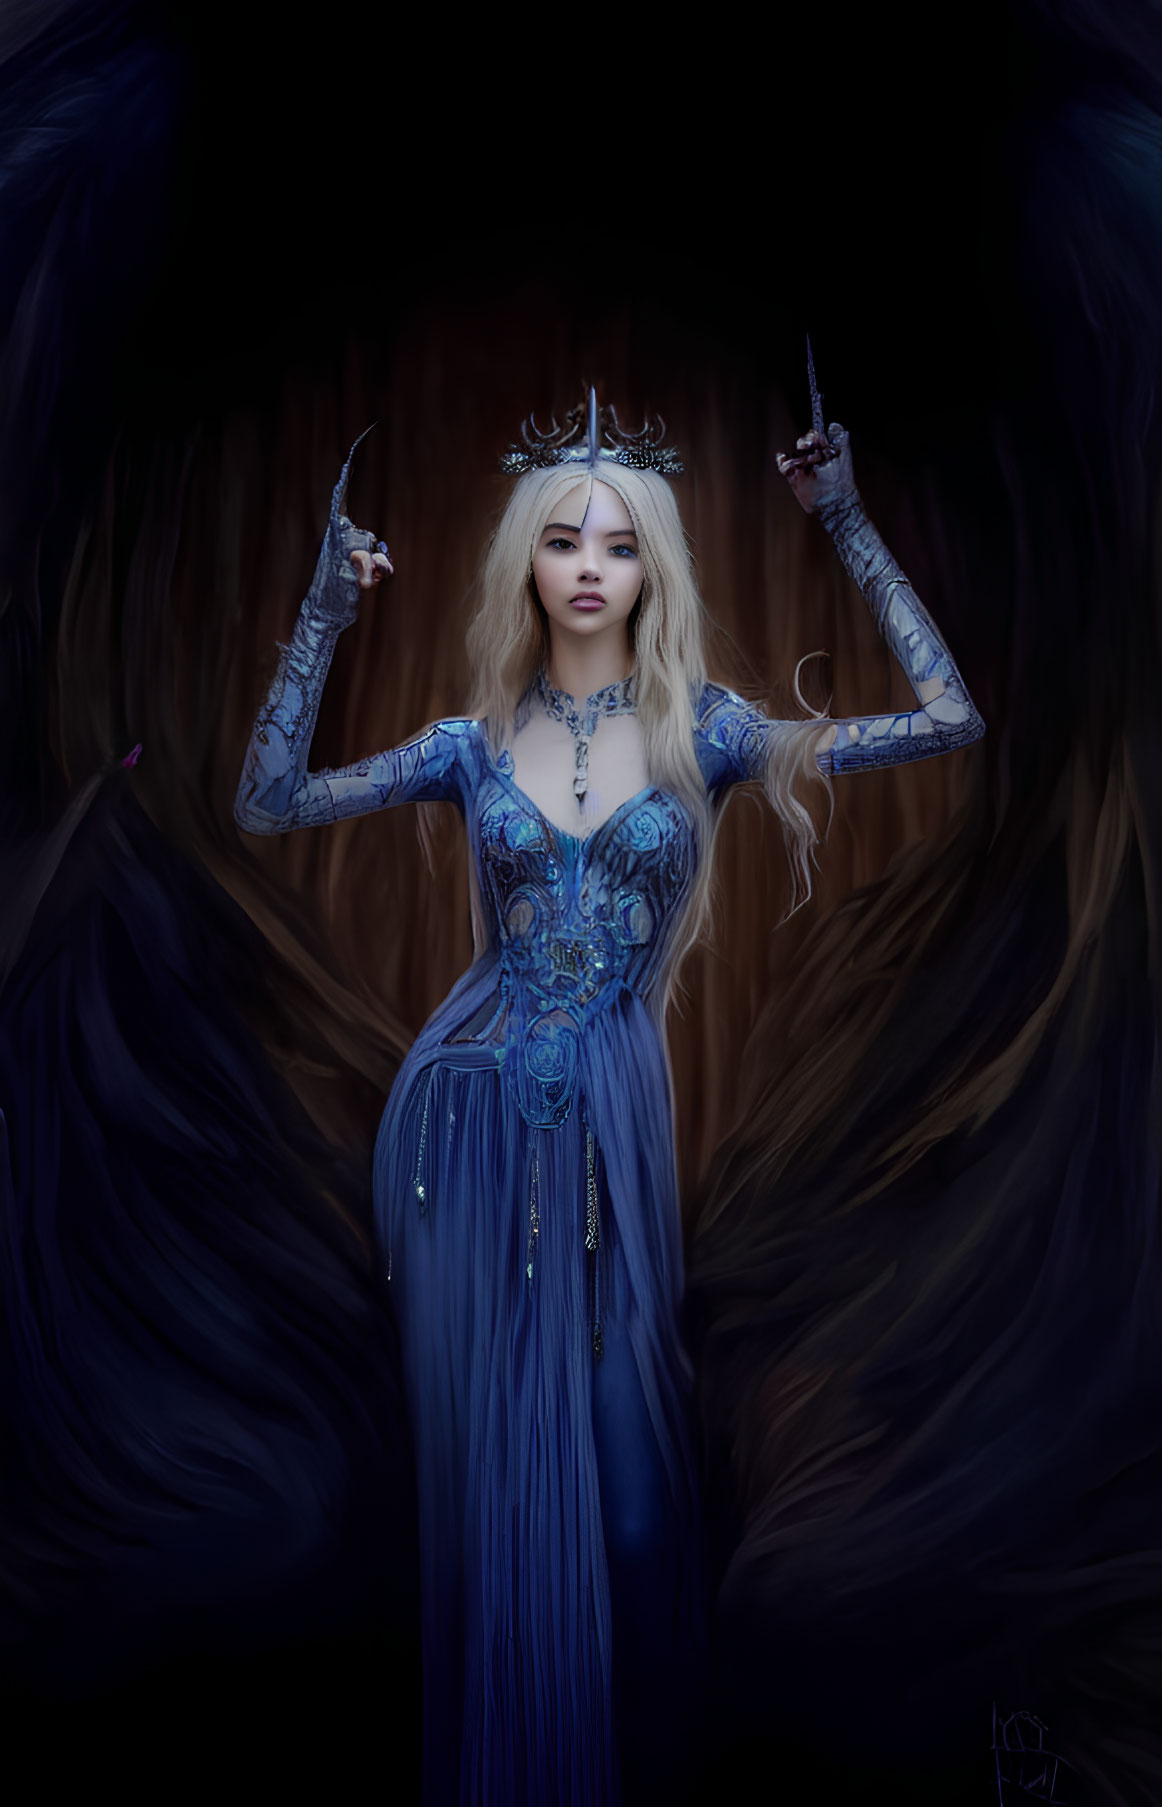 Blonde woman in blue dress and crown with raised fingers